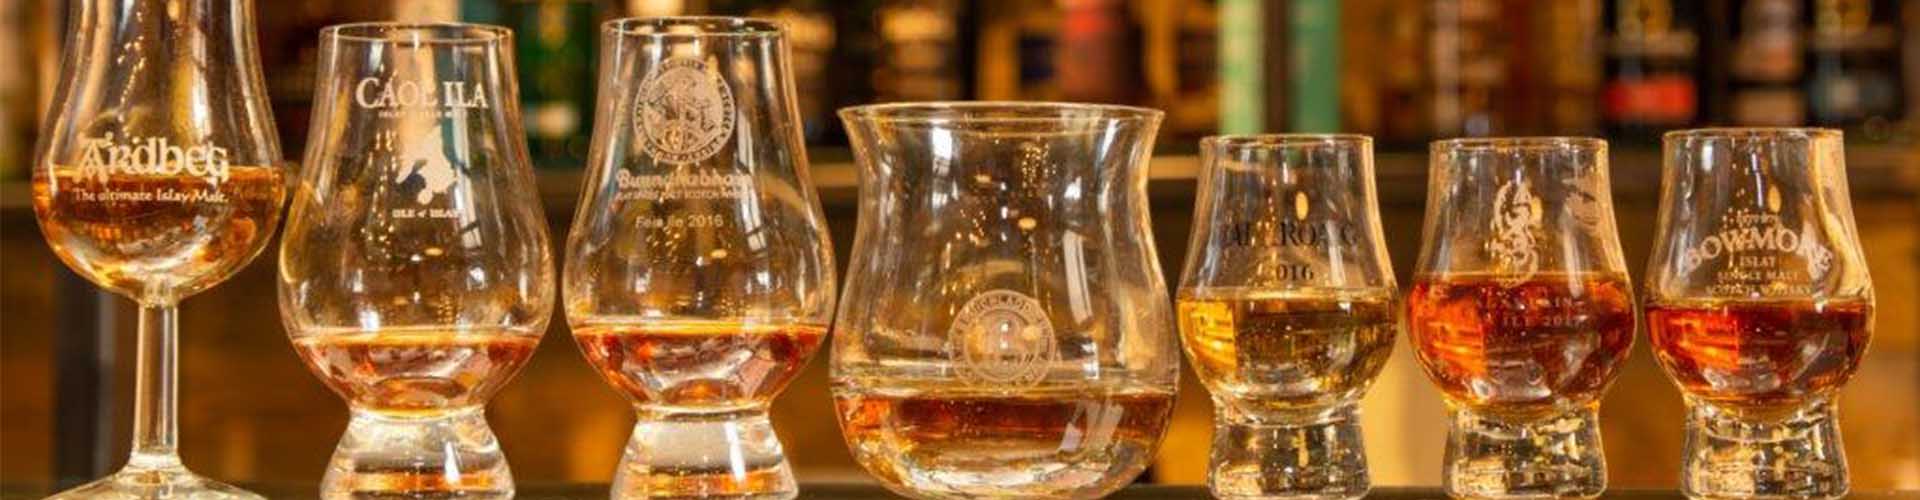 A selection of Islay whiskies on their dram glasses